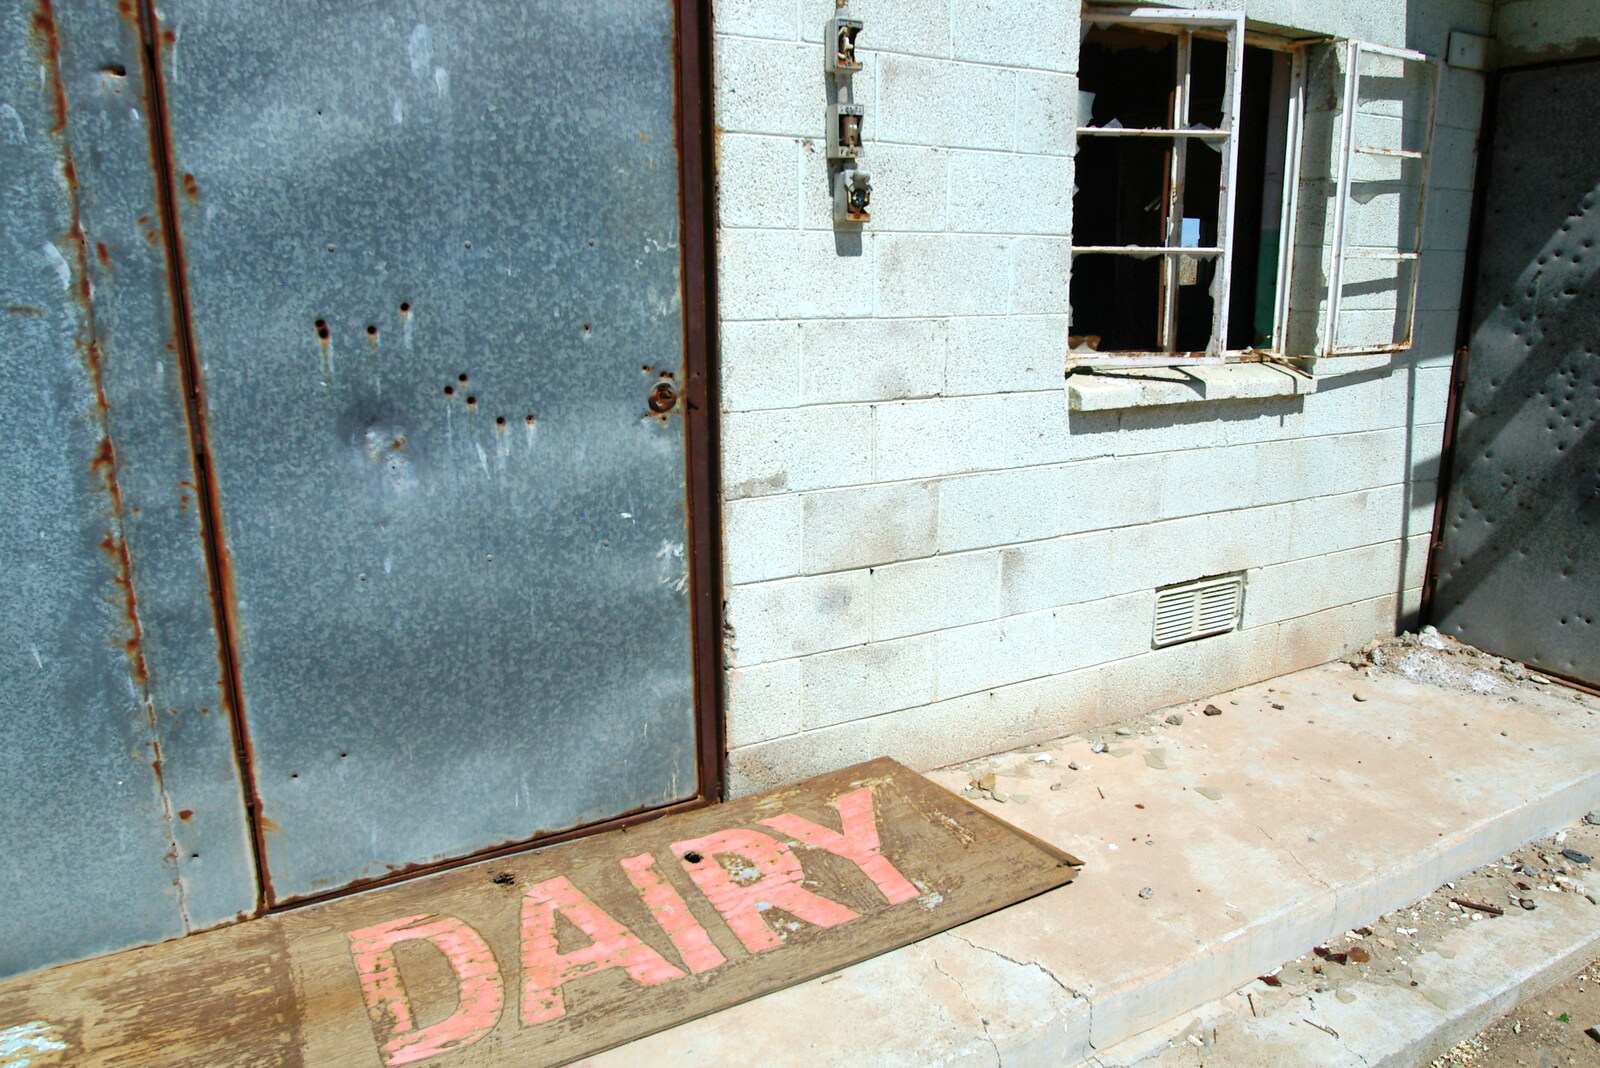 The dairy's front-door, all shot-up from California Desert: El Centro, Imperial Valley, California, US - 24th September 2005